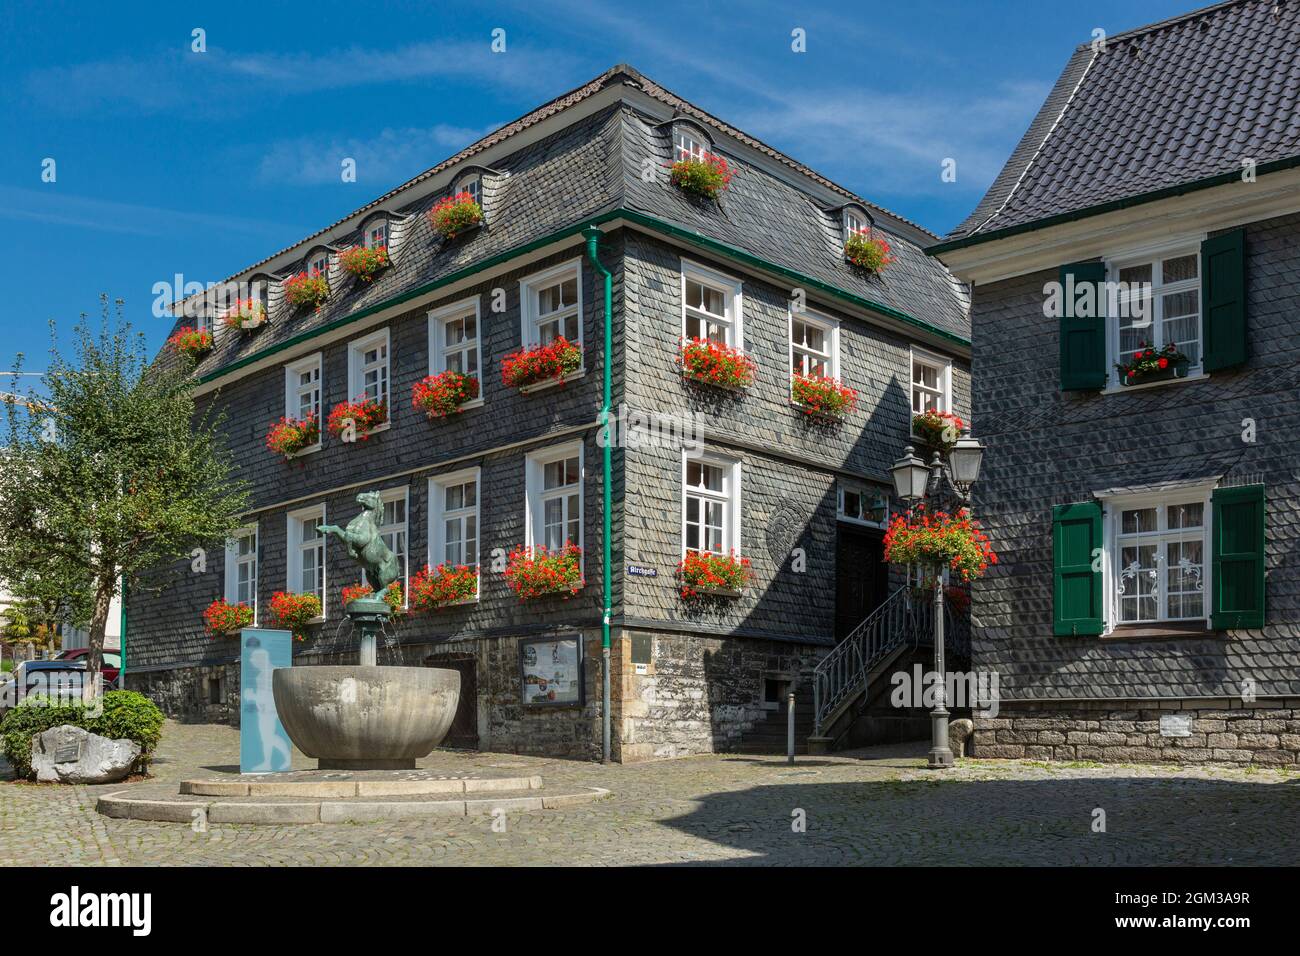 Germany, Mettmann, Bergisches Land, Niederbergisches Land, Niederberg, Rhineland, North Rhine-Westphalia, NRW, Alte Buergermeisterei, former mayors office, municipal museum, former named Metzmacher House, ahead the horse well with a sculpture of Rudolf Christian Baisch Stock Photo